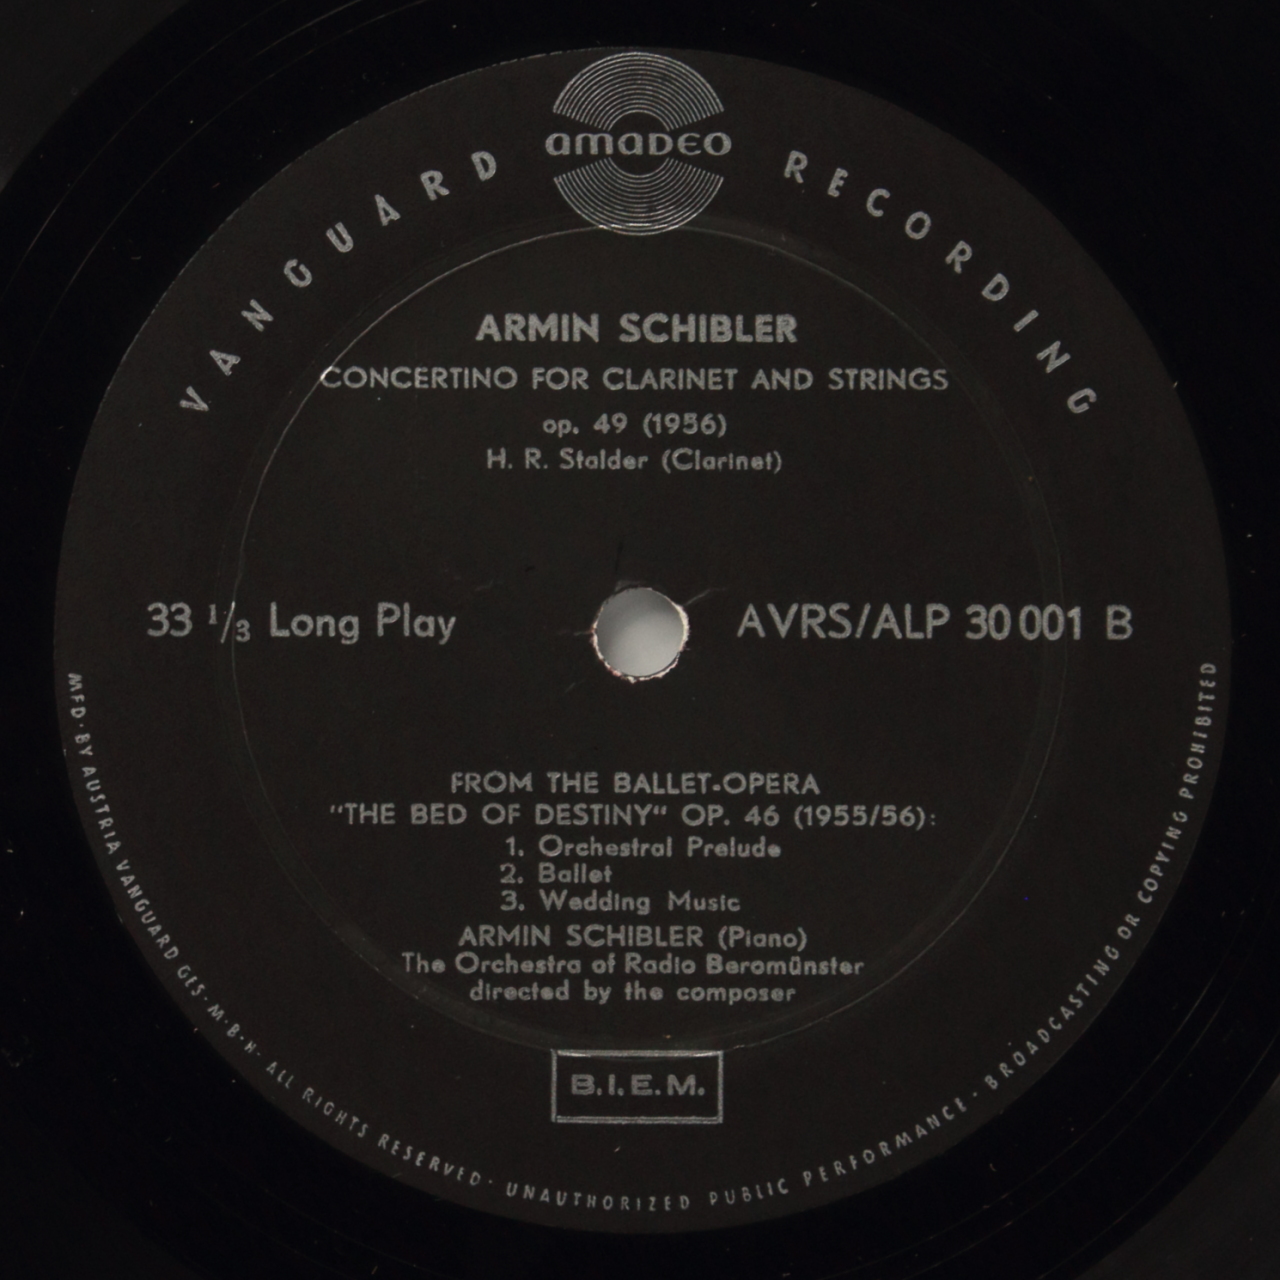 Schibler: Conductic and Playing his Works